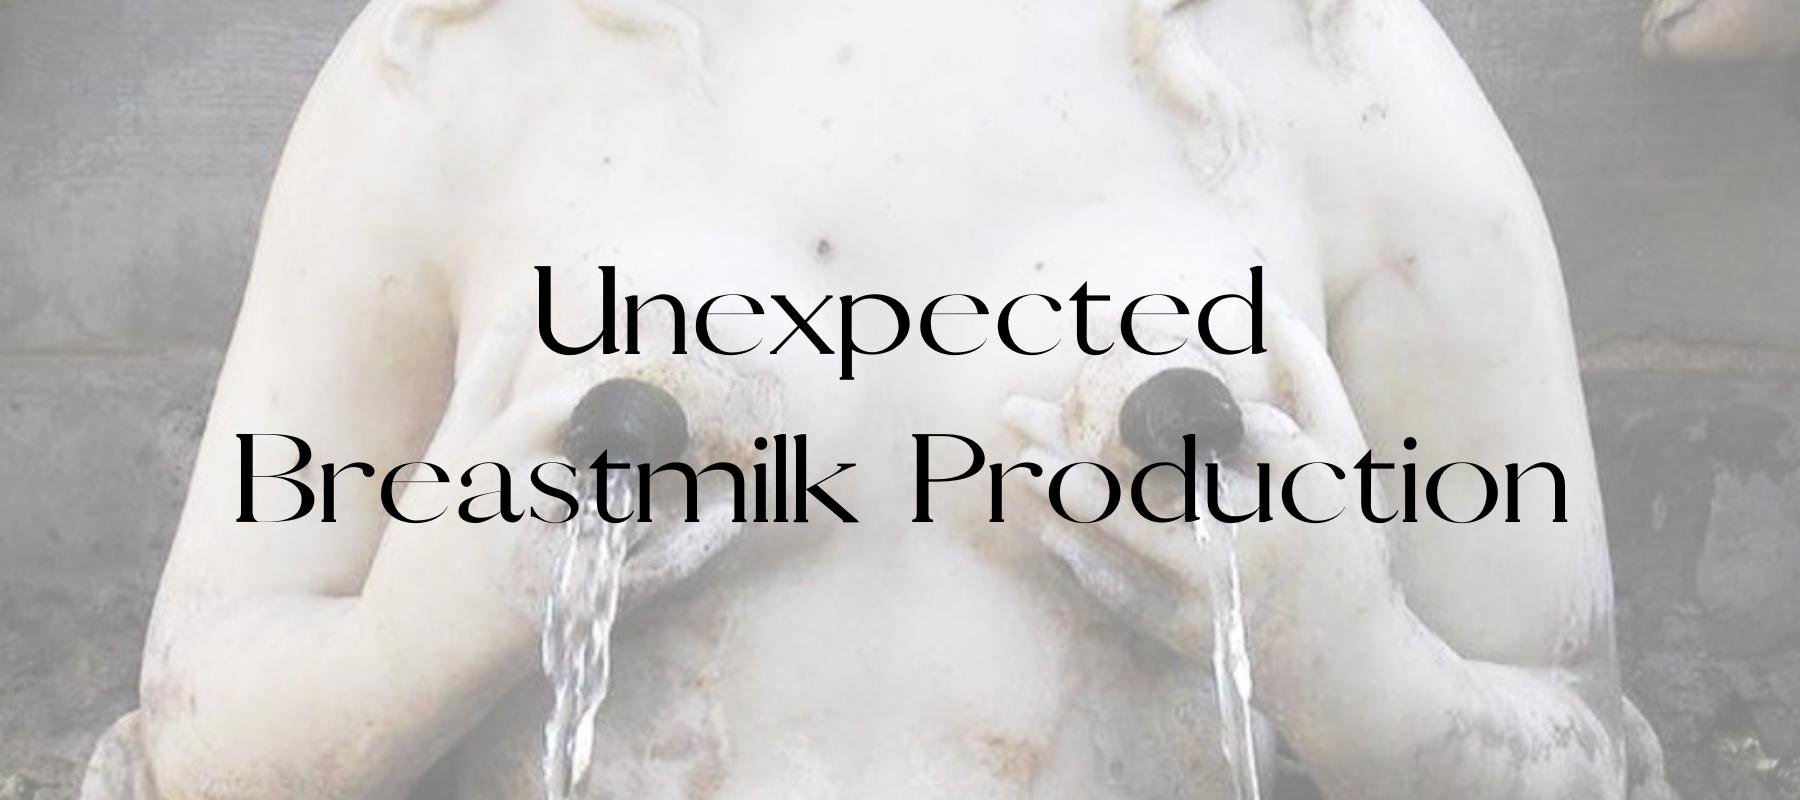 Unexpected Breastmilk Production